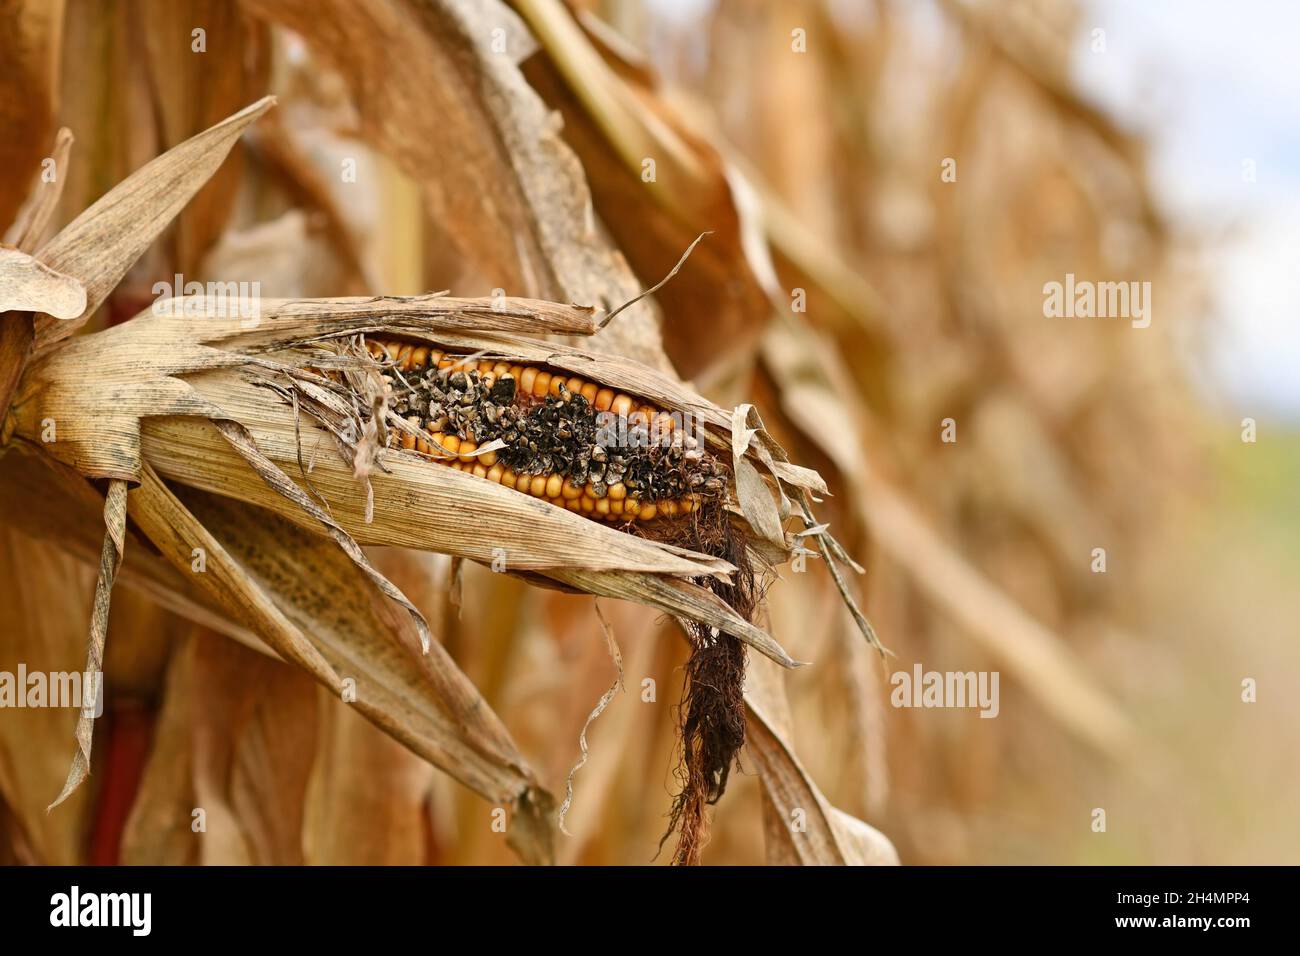 Close up of sick rotten corncob with black maize kernel in agricultural field Stock Photo